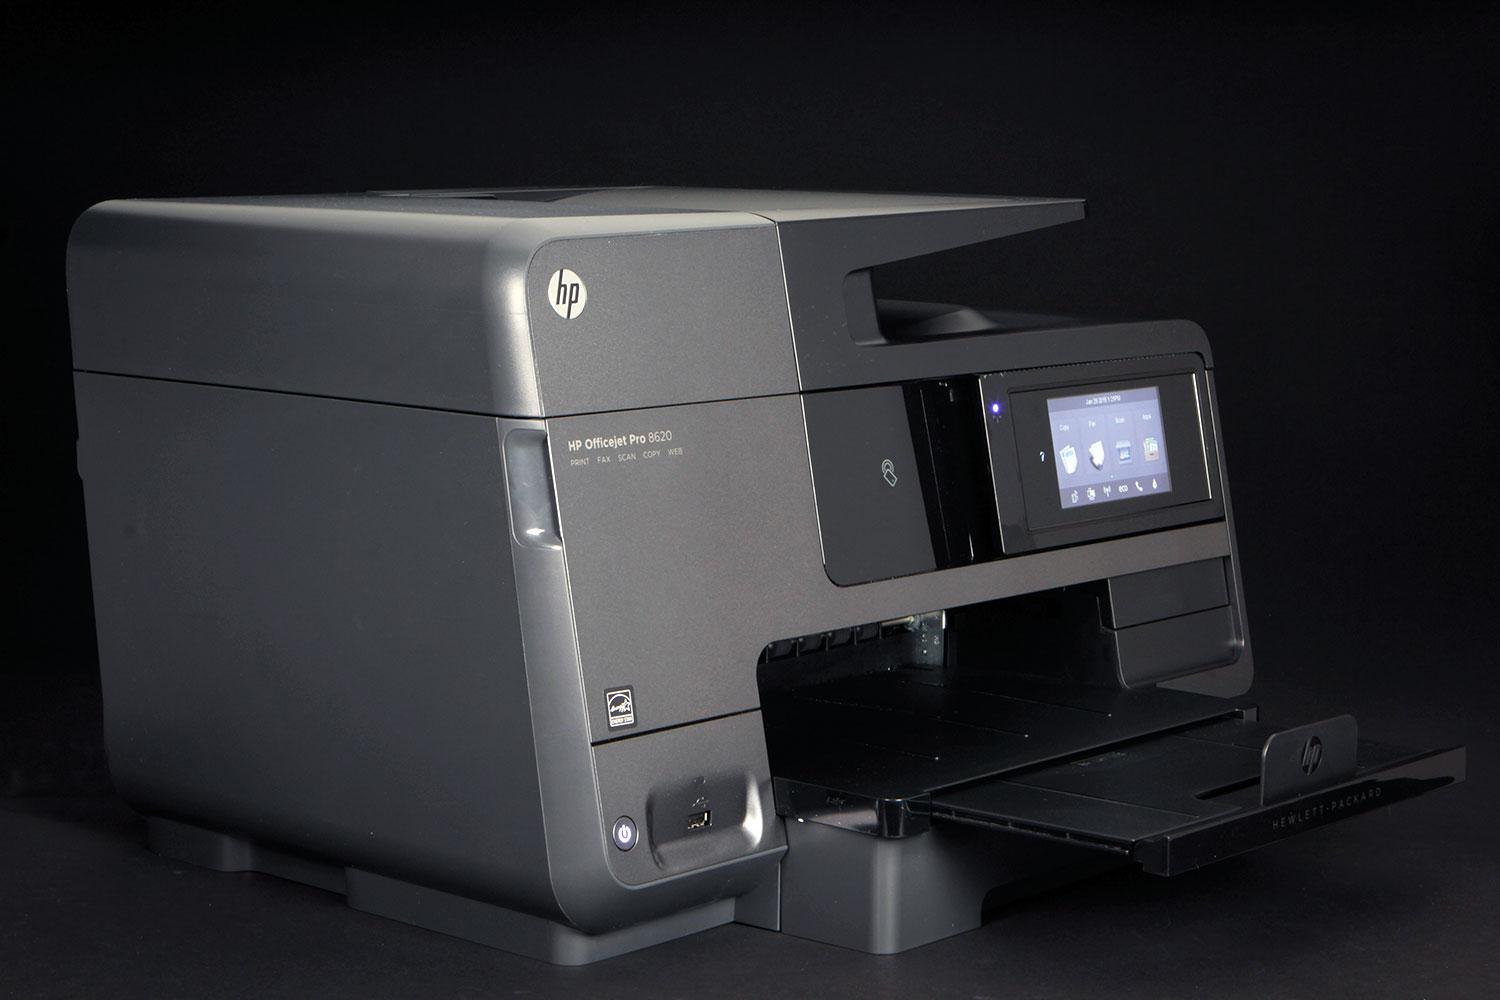 HP Officejet Pro 8620 review